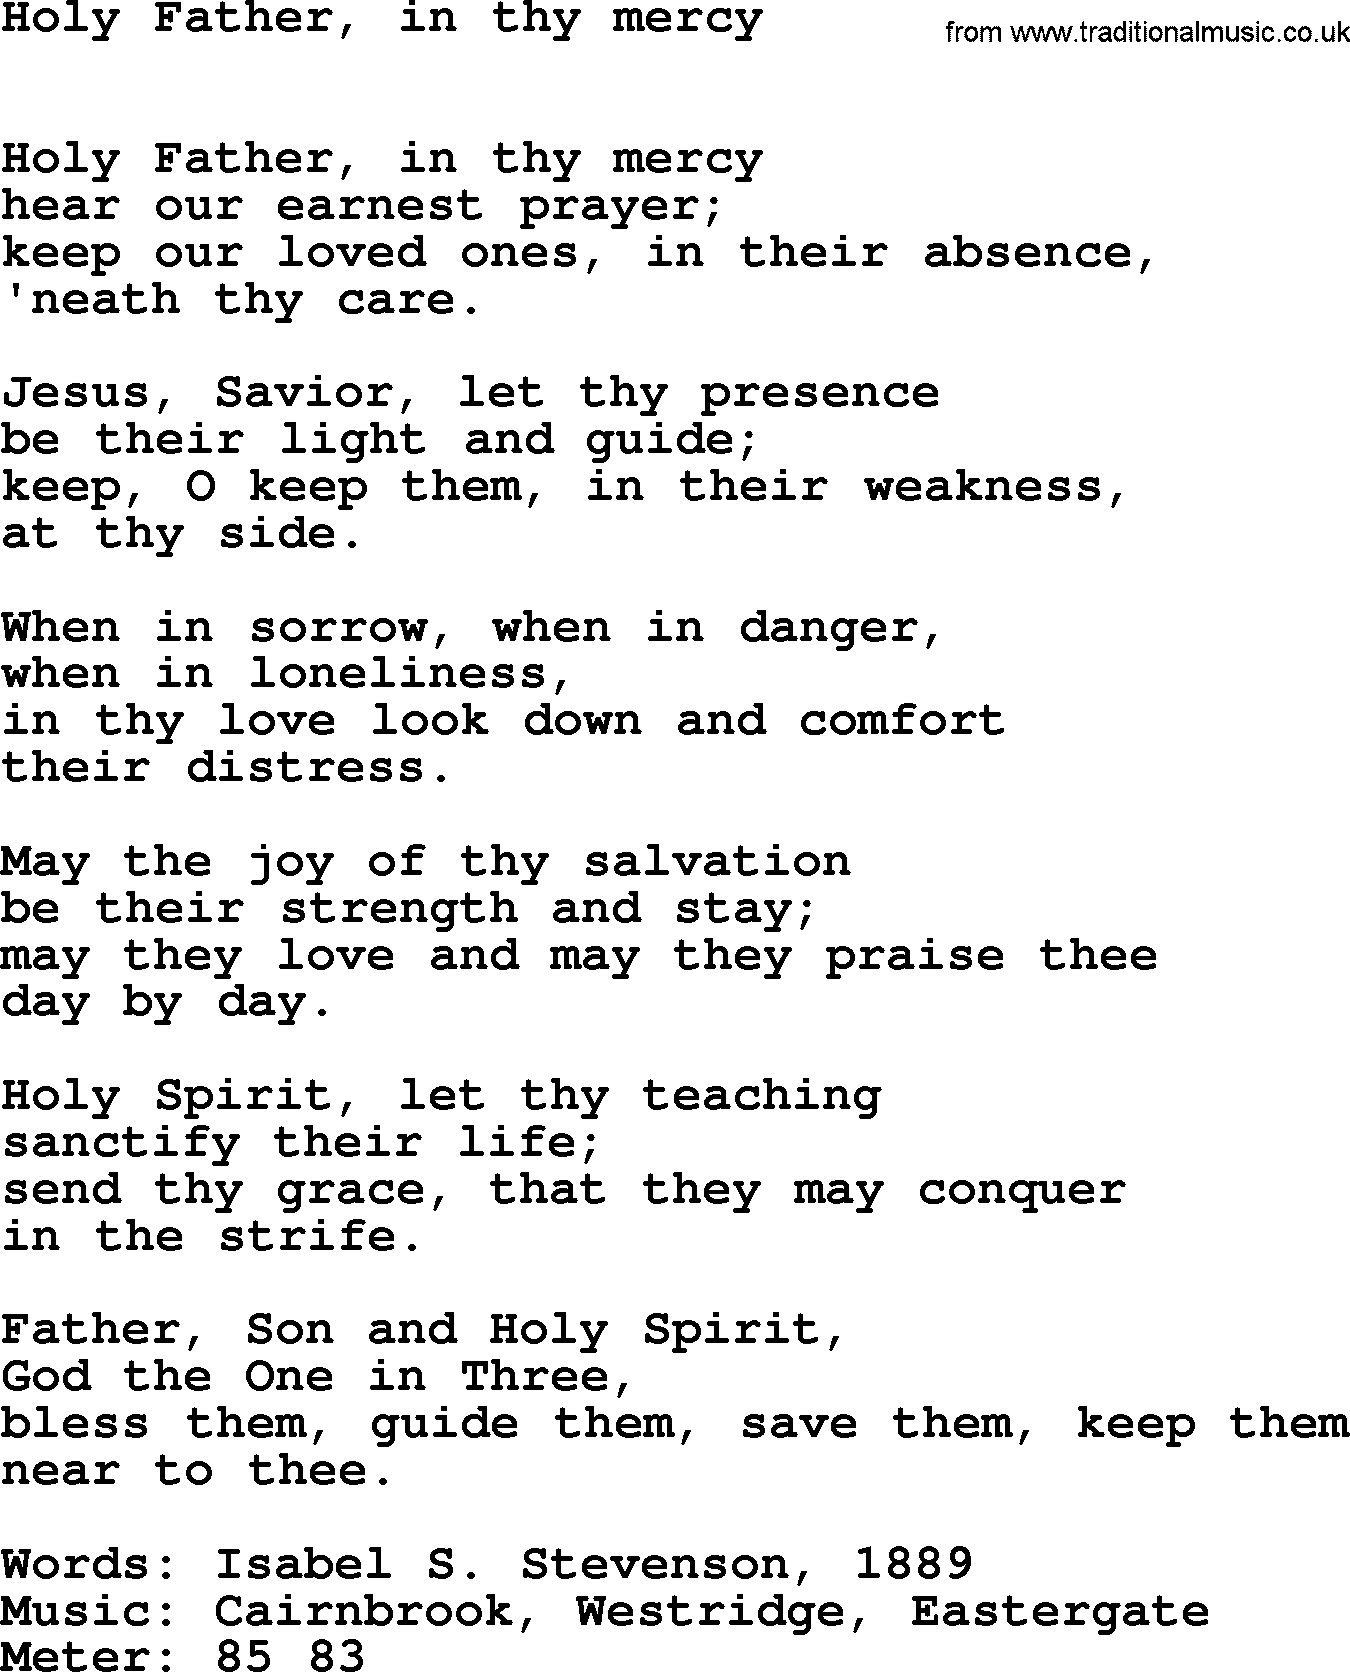 Book of Common Praise Hymn: Holy Father, In Thy Mercy.txt lyrics with midi music